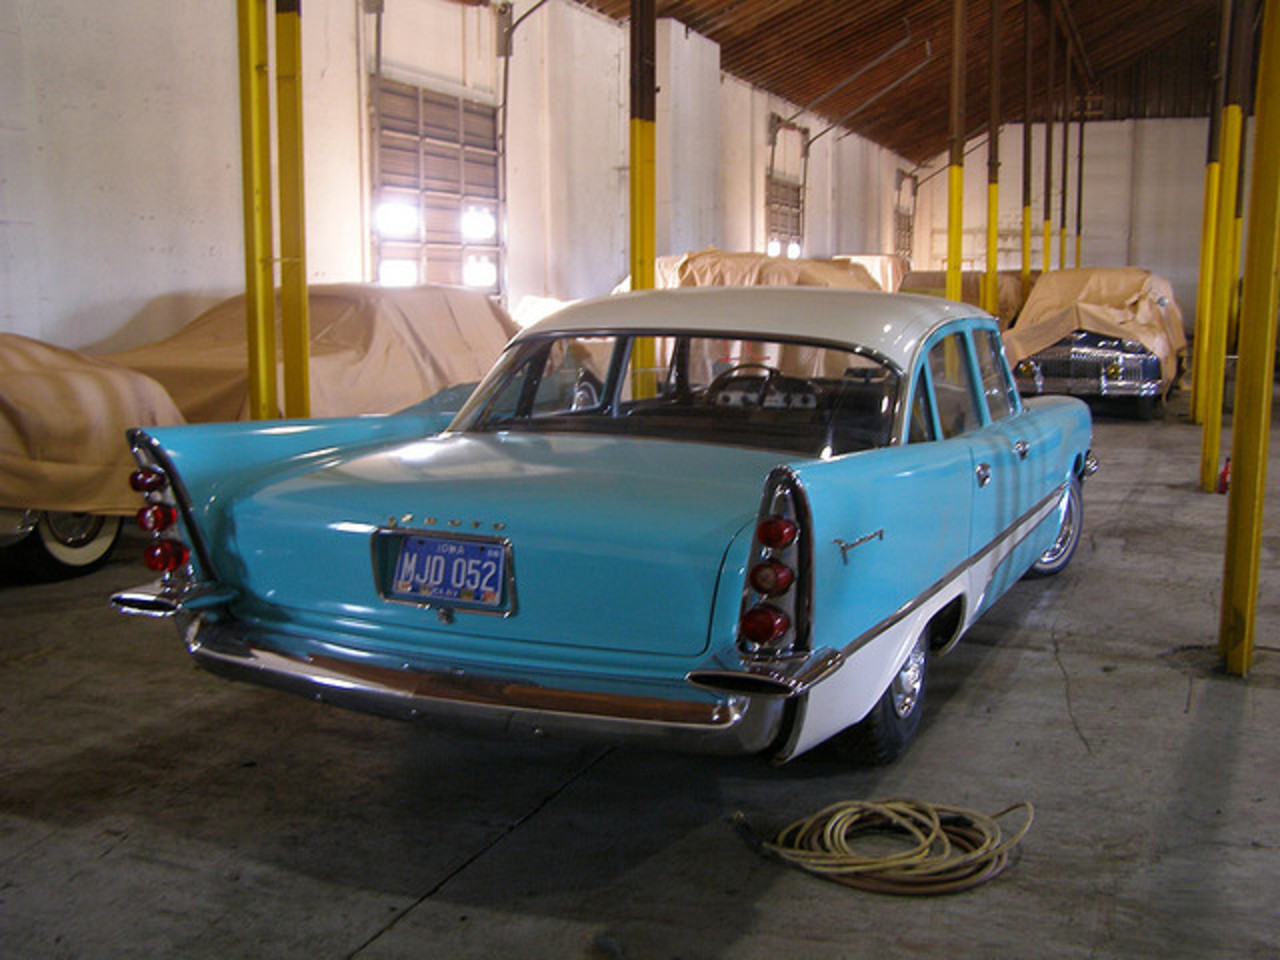 De Soto Firesweep 4dr Photo Gallery: Photo #07 out of 12, Image ...